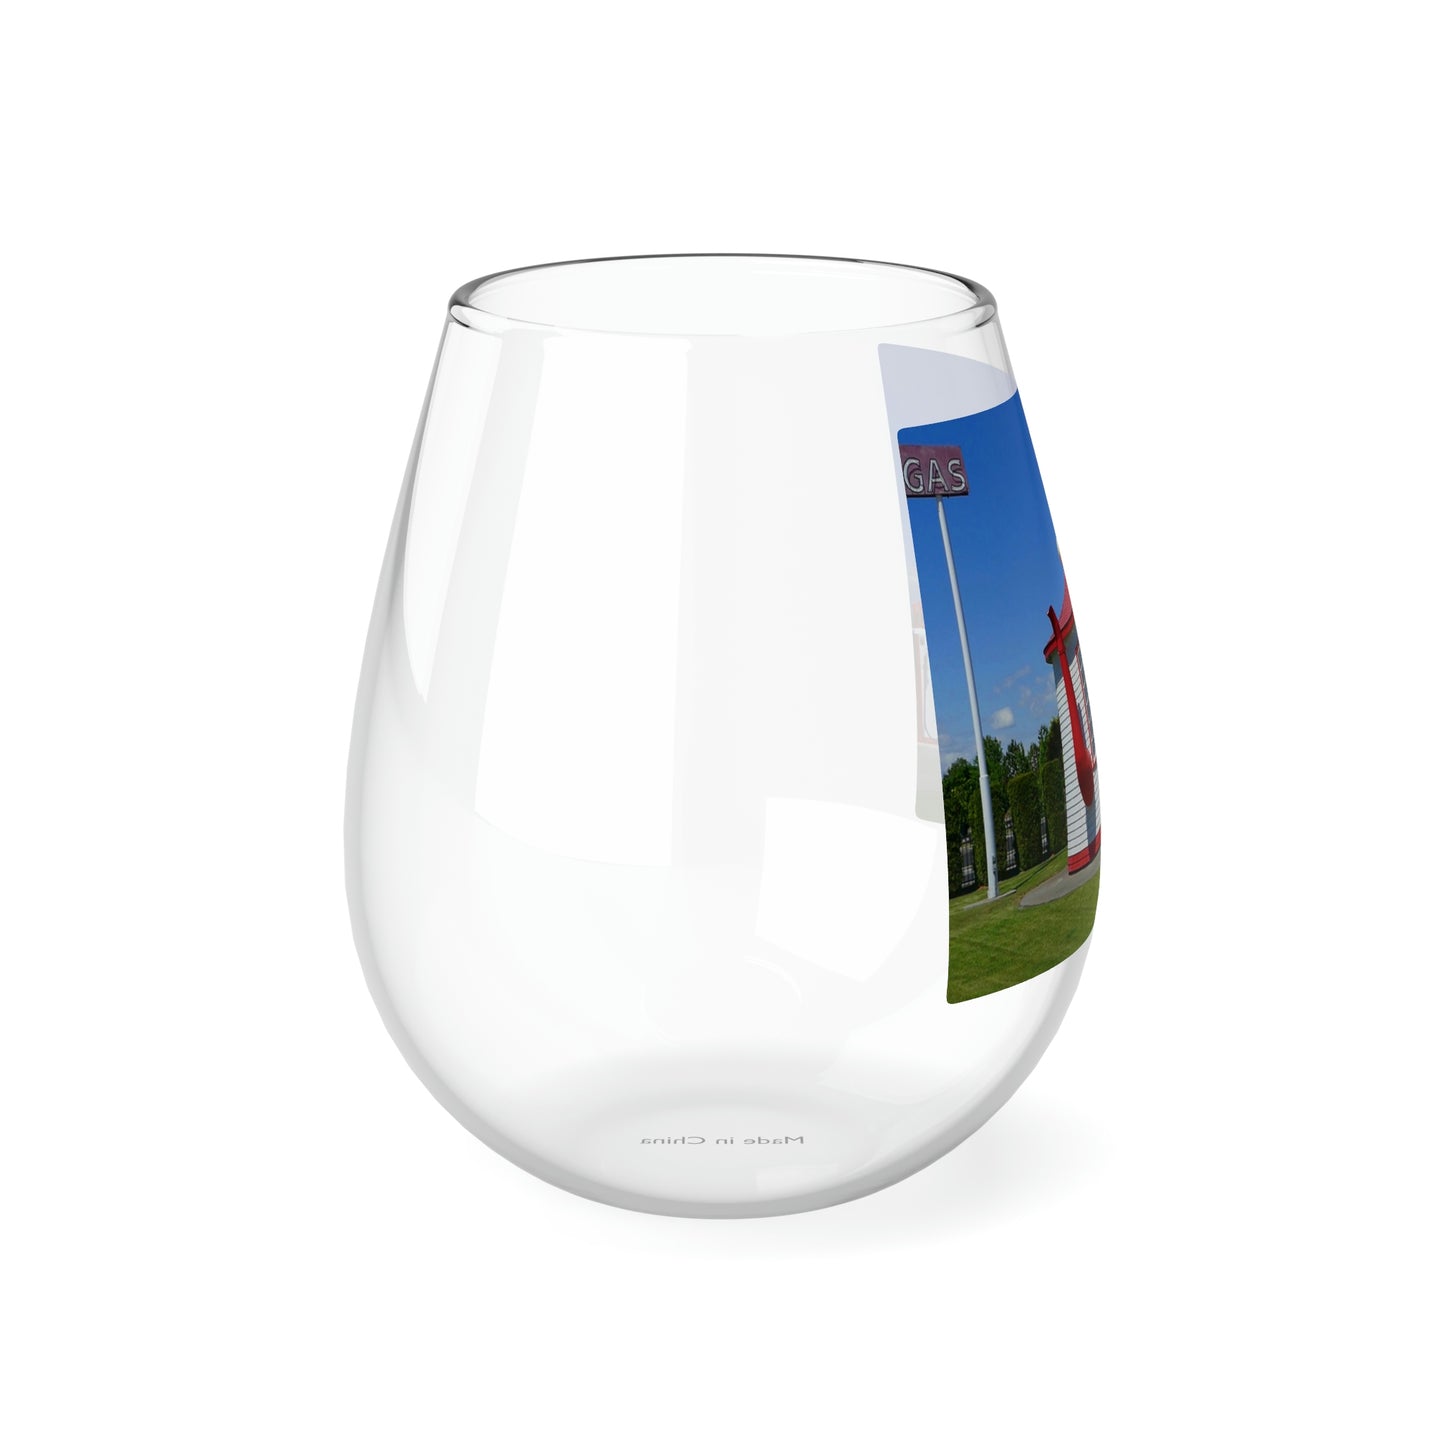 Zillah's Teapot Dome Service Station - Stemless Wine Glass, 11.75 oz - Fry1Productions